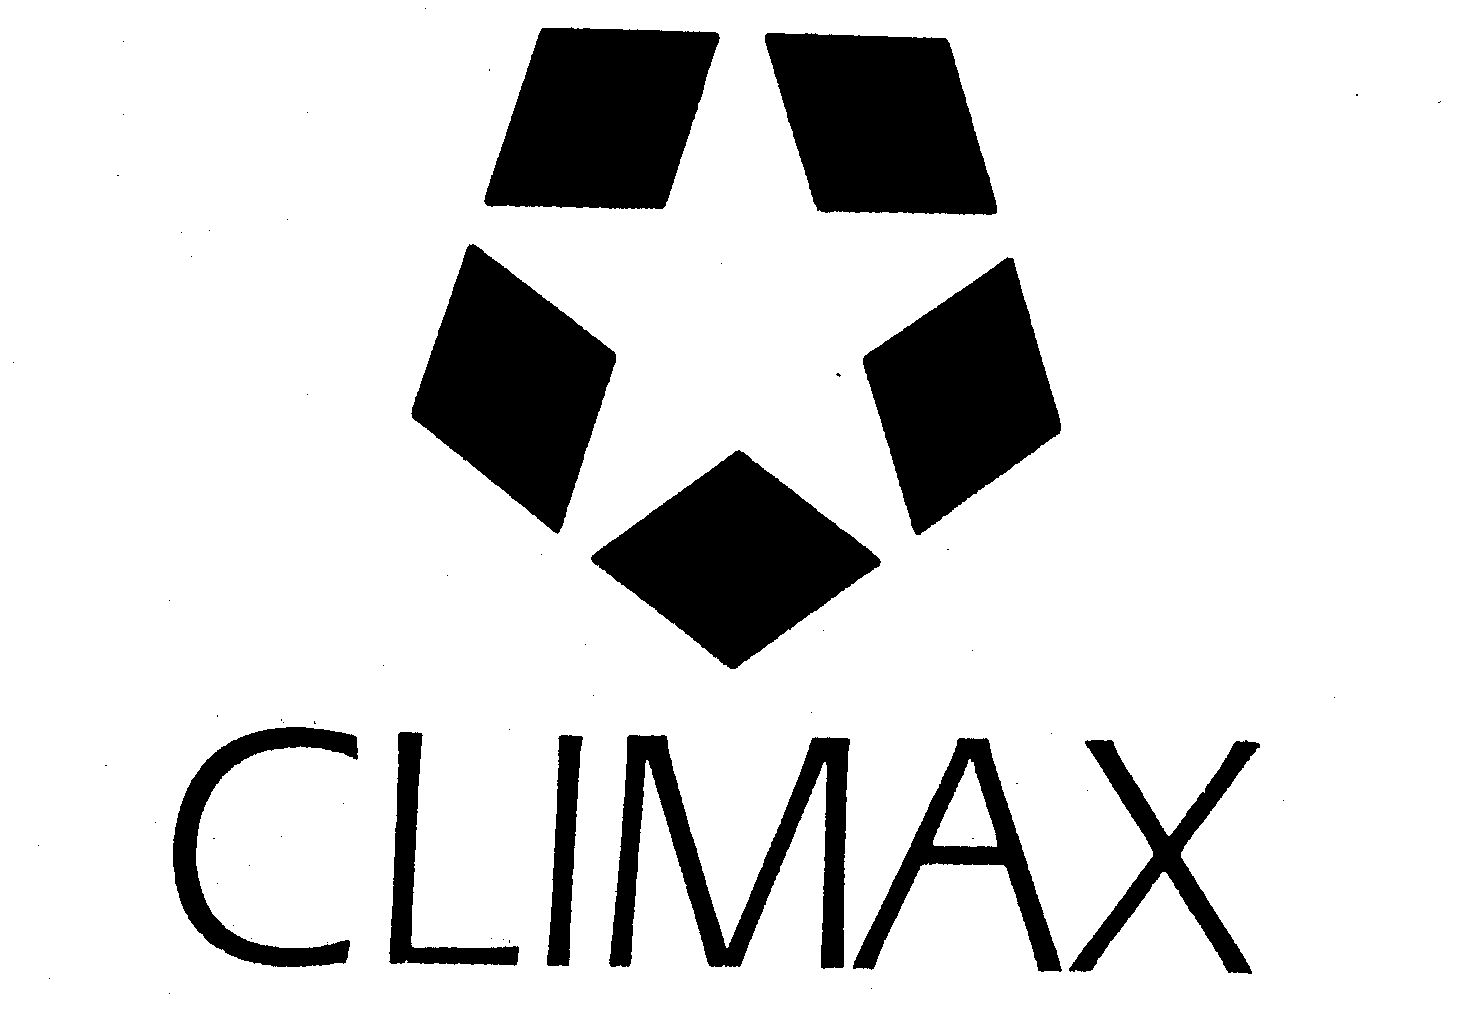  CLIMAX